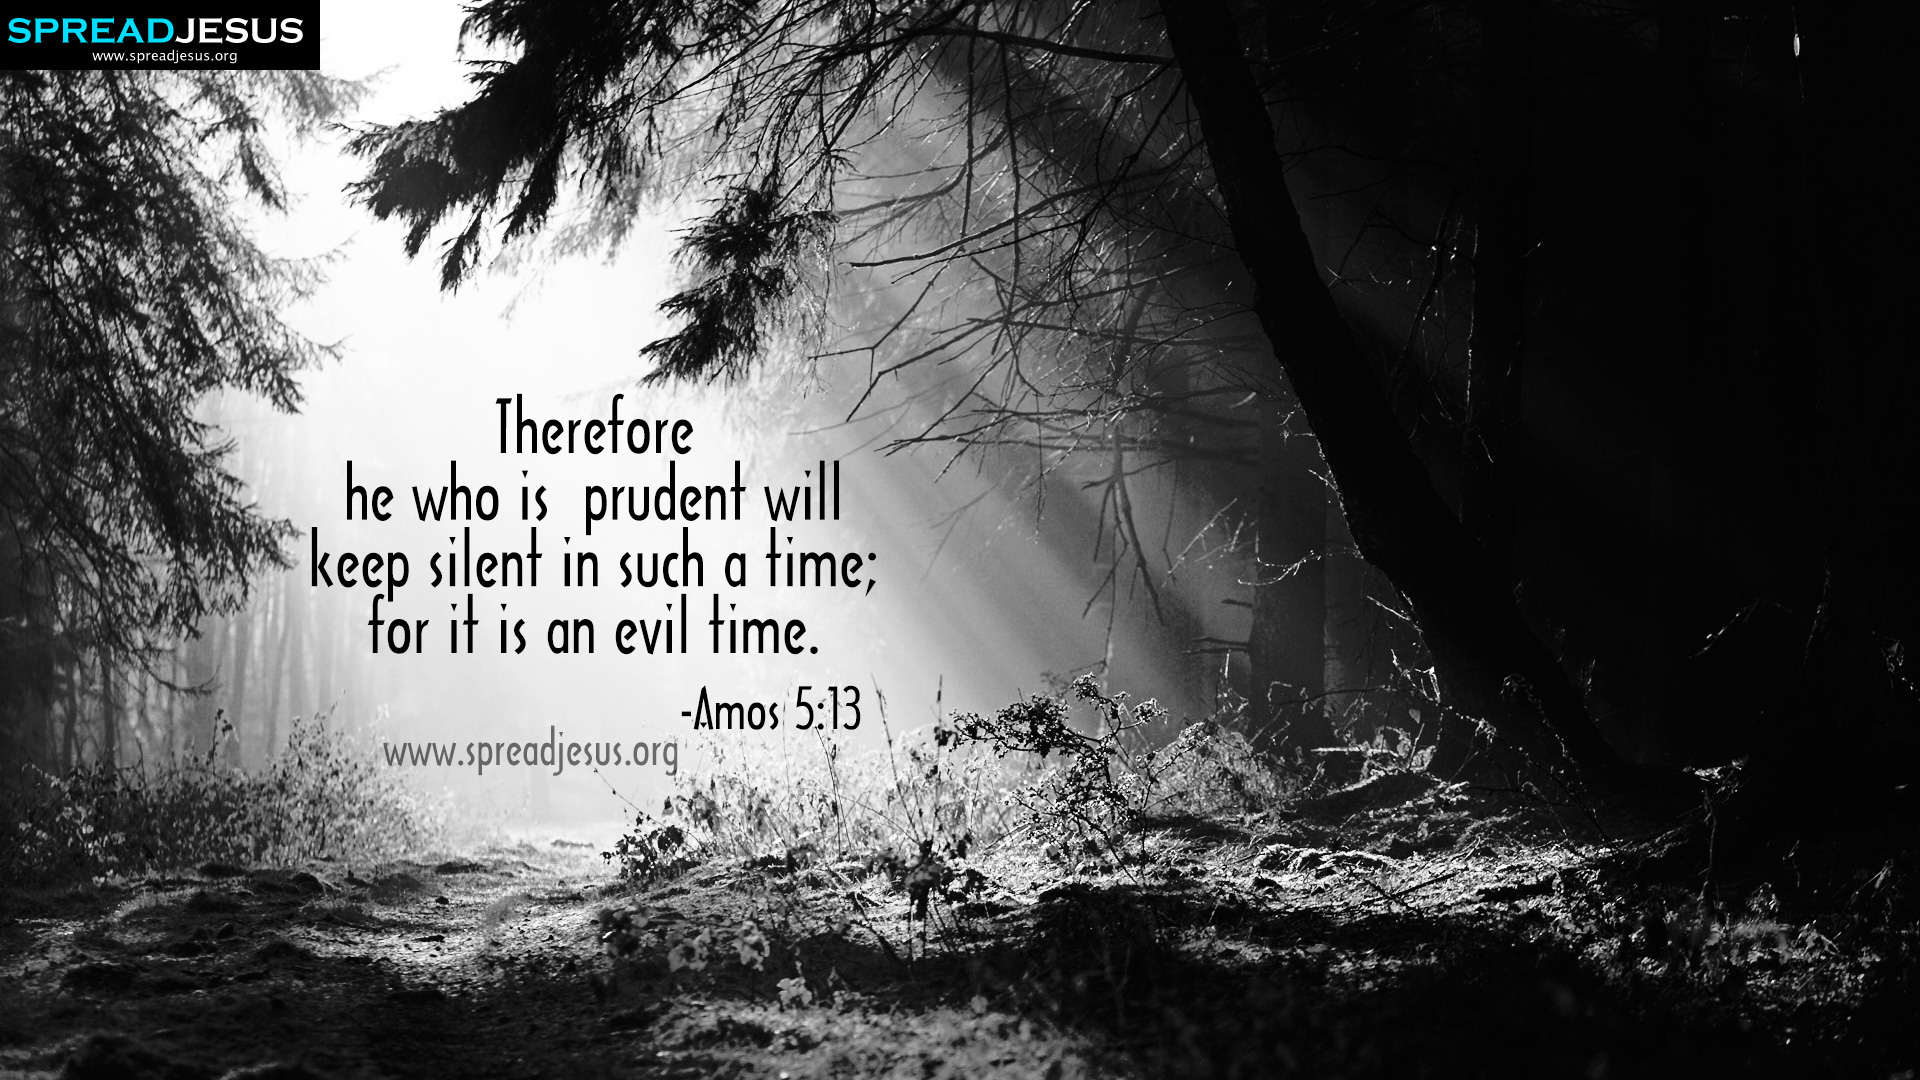 13 Bible Quotes Hd Wallpapers,facebook Timeline Covers - Tyndall Effect In Forest - HD Wallpaper 